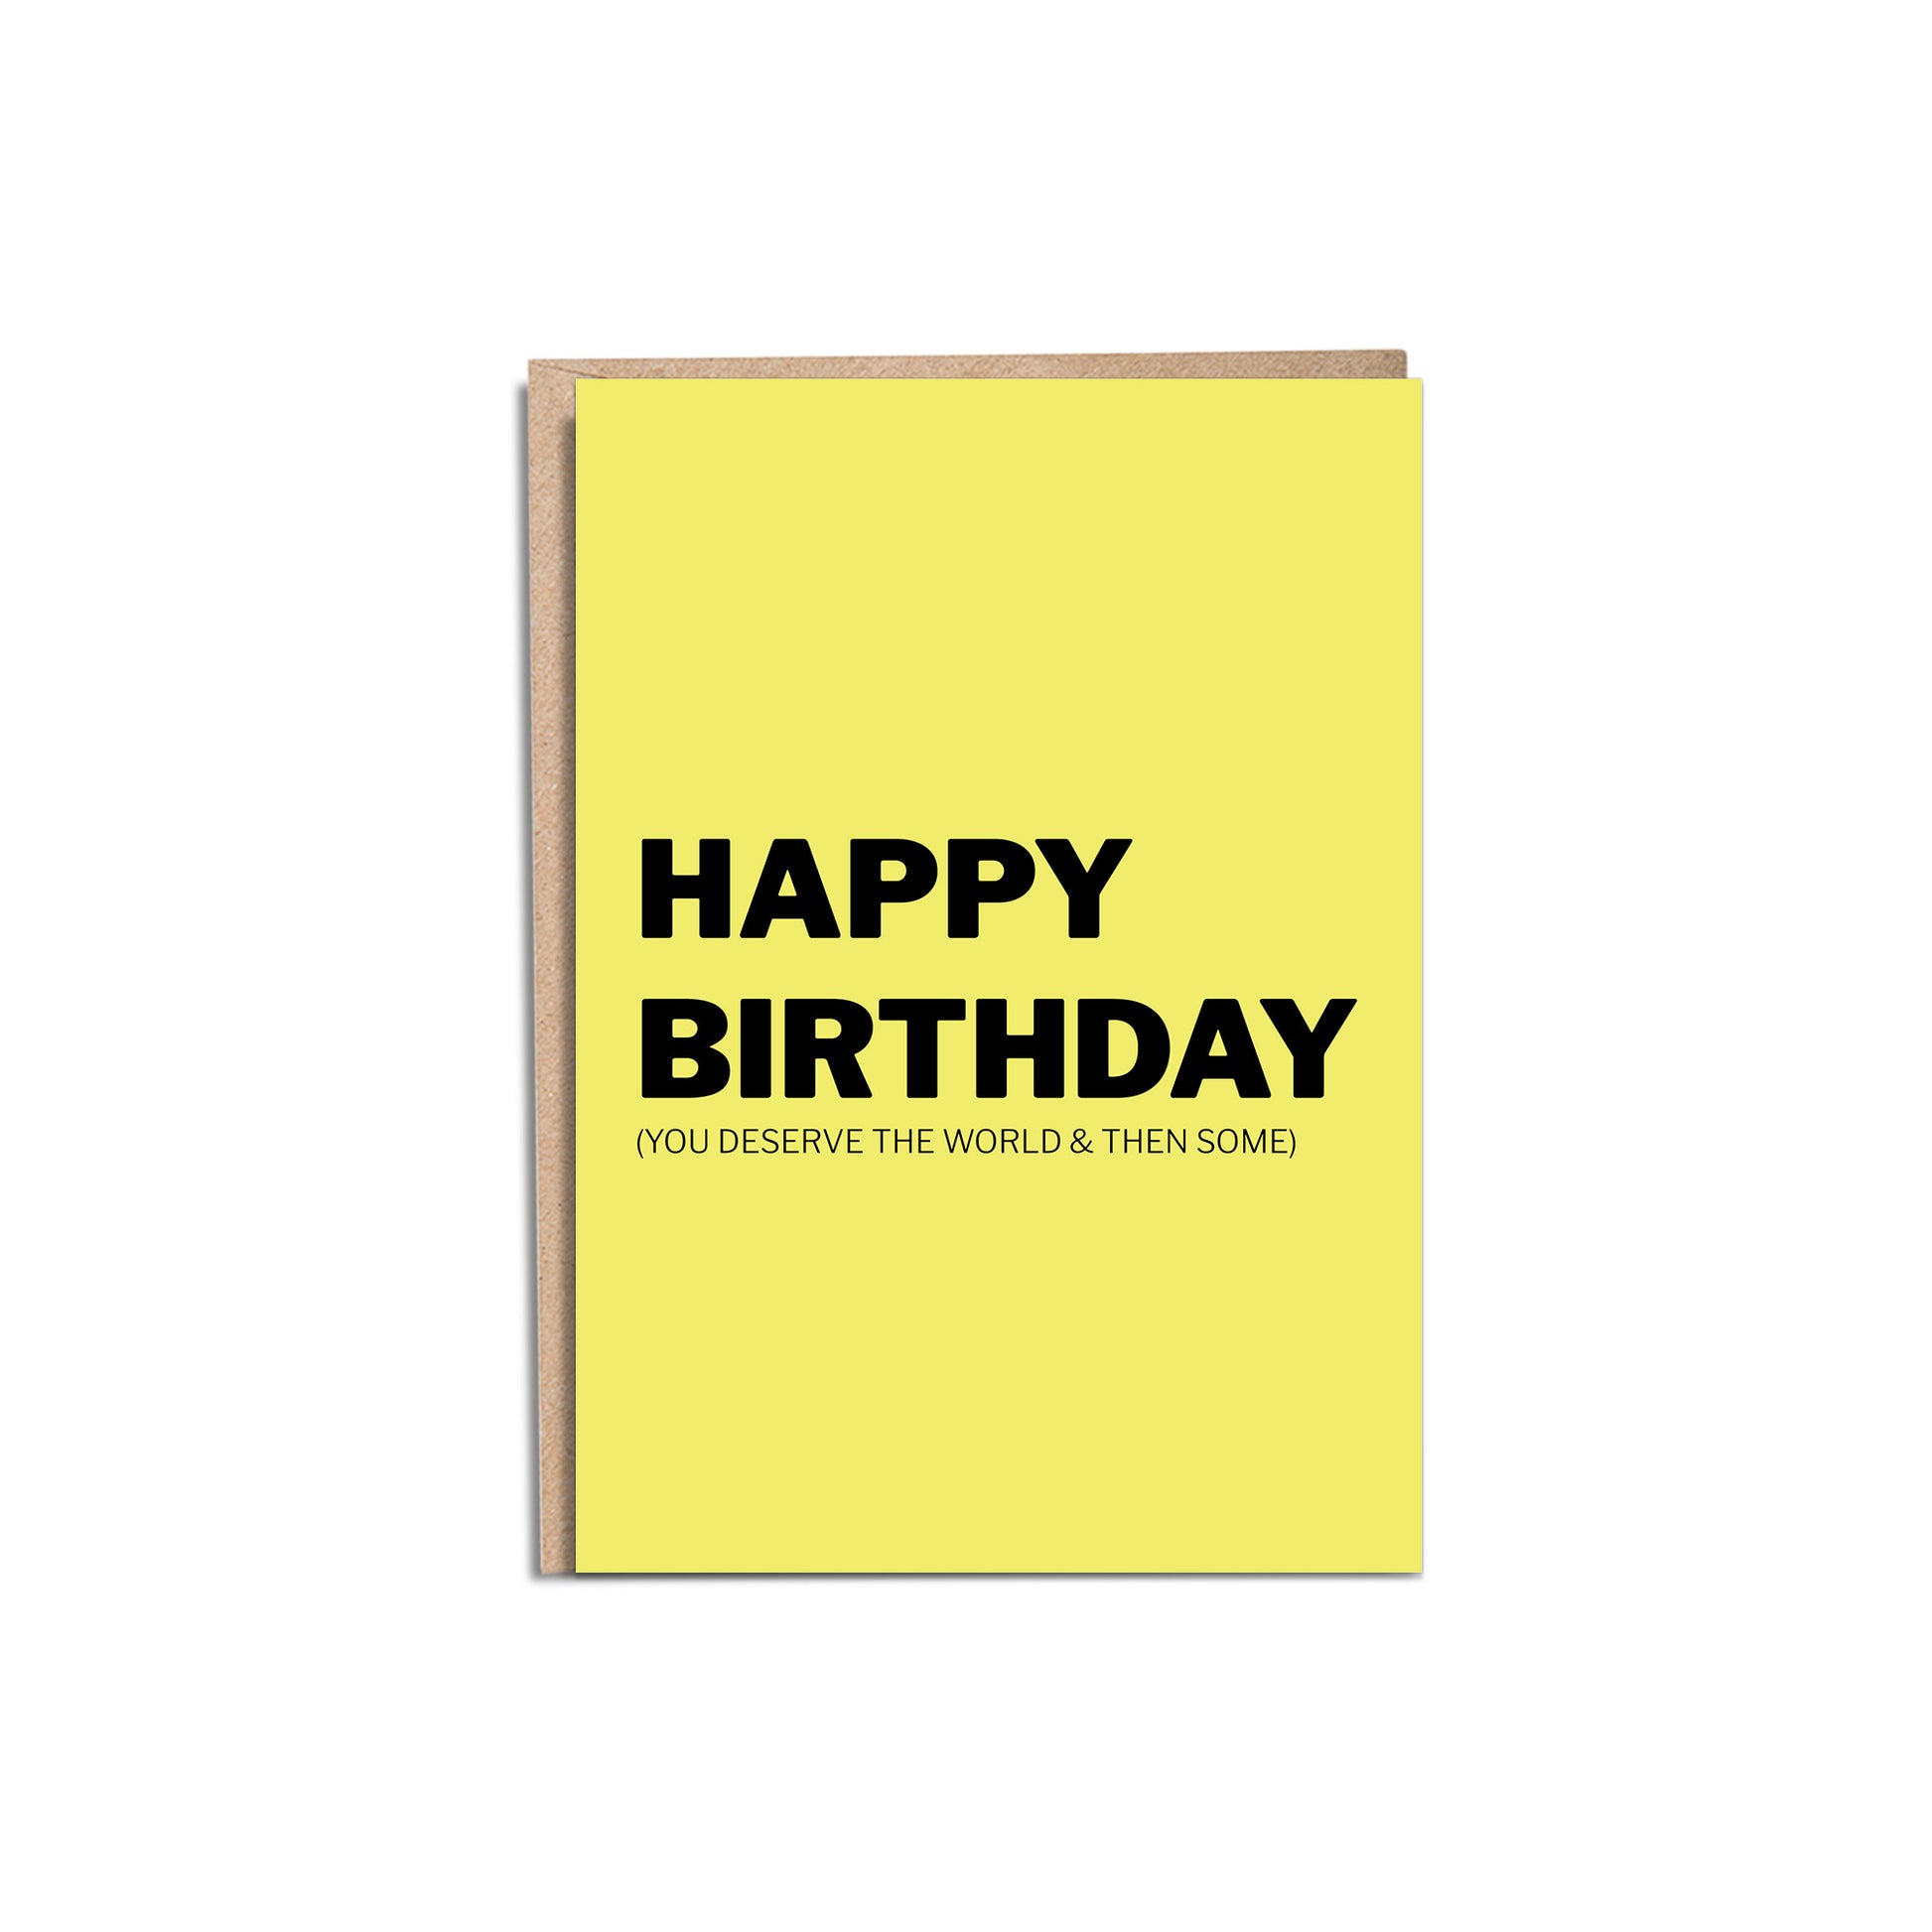 You Deserve 5x7” simple yellow birthday greeting card from Goods Made By Digitrillnana, Ashley Fletcher. Black Woman Owned. Perfect card to celebrate a birthday, or add to a gift!